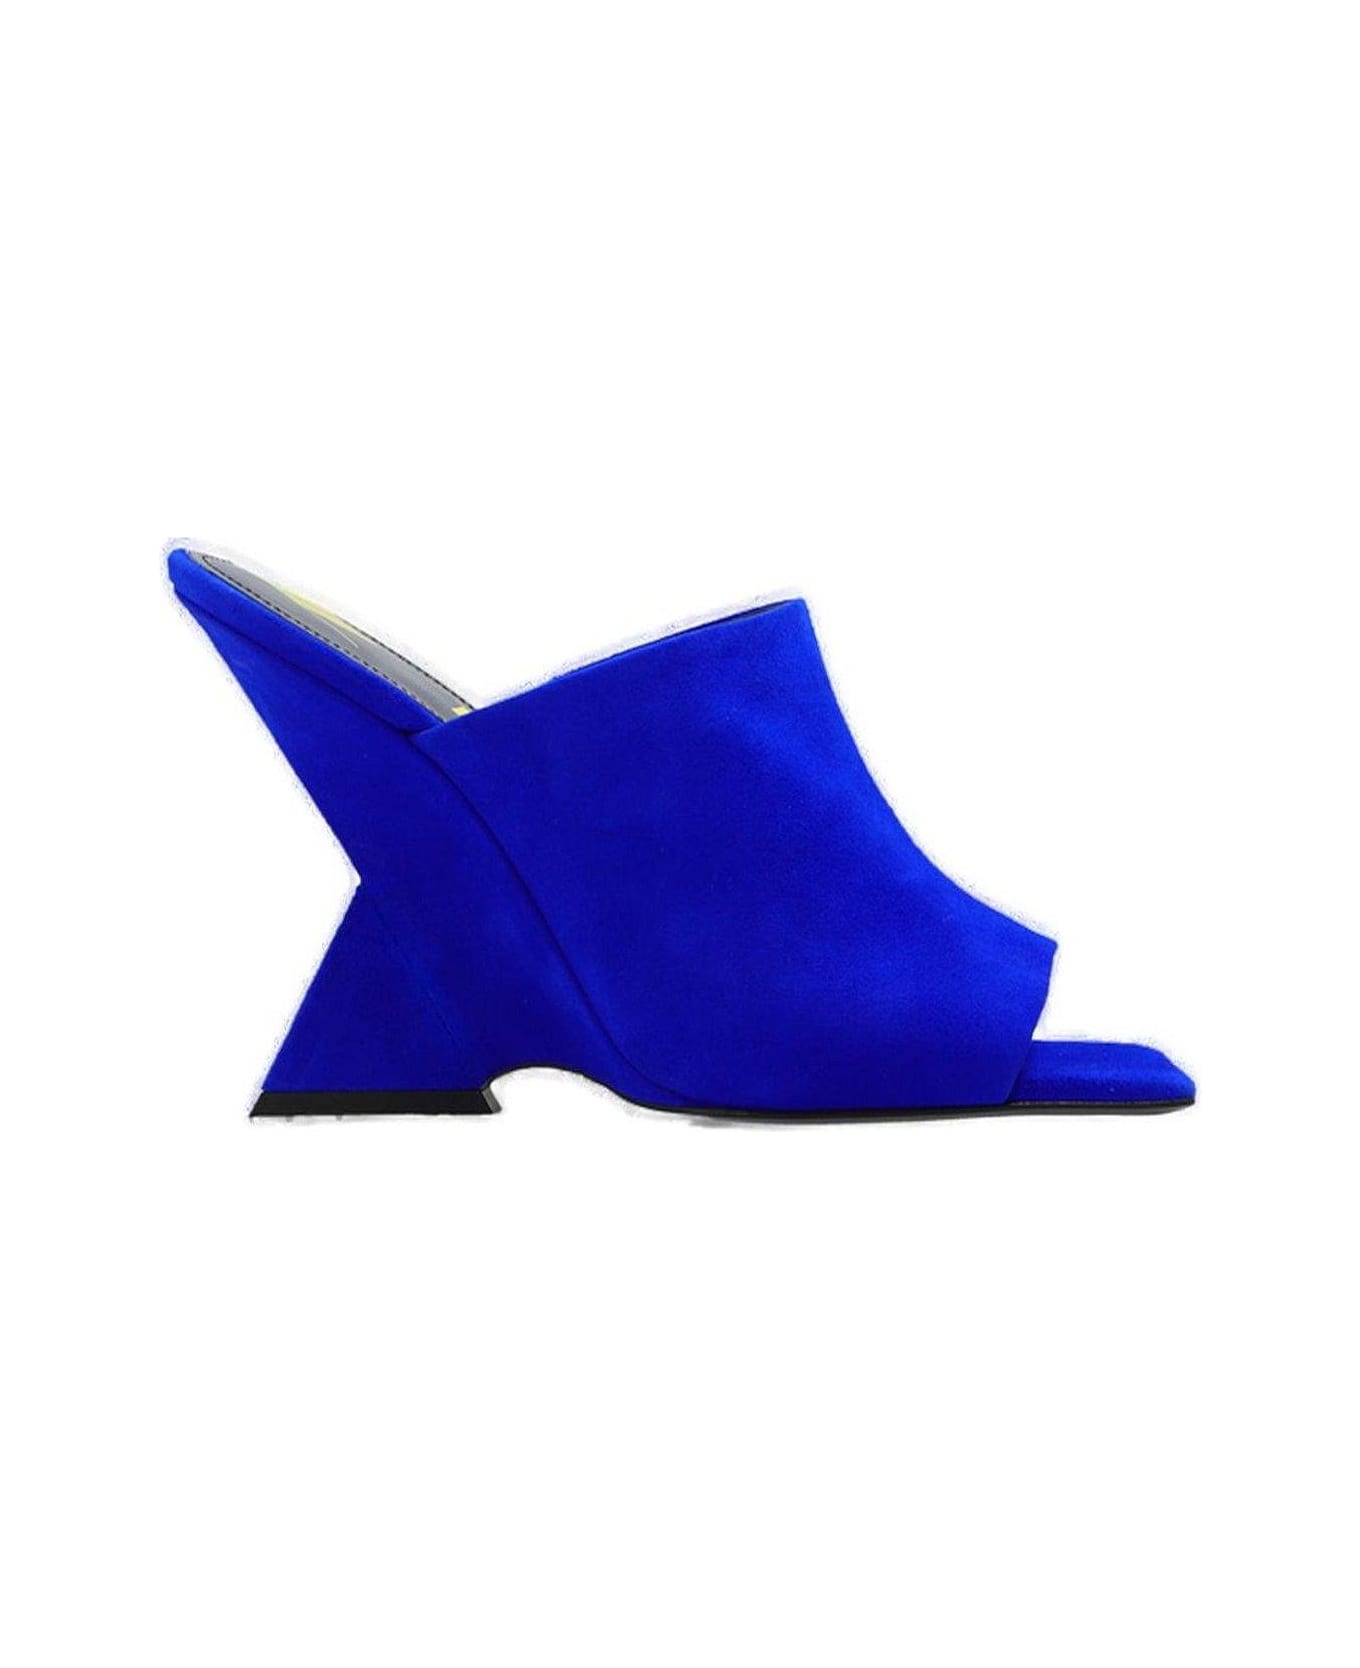 The Attico Cheope Wedge Mules - BLUE